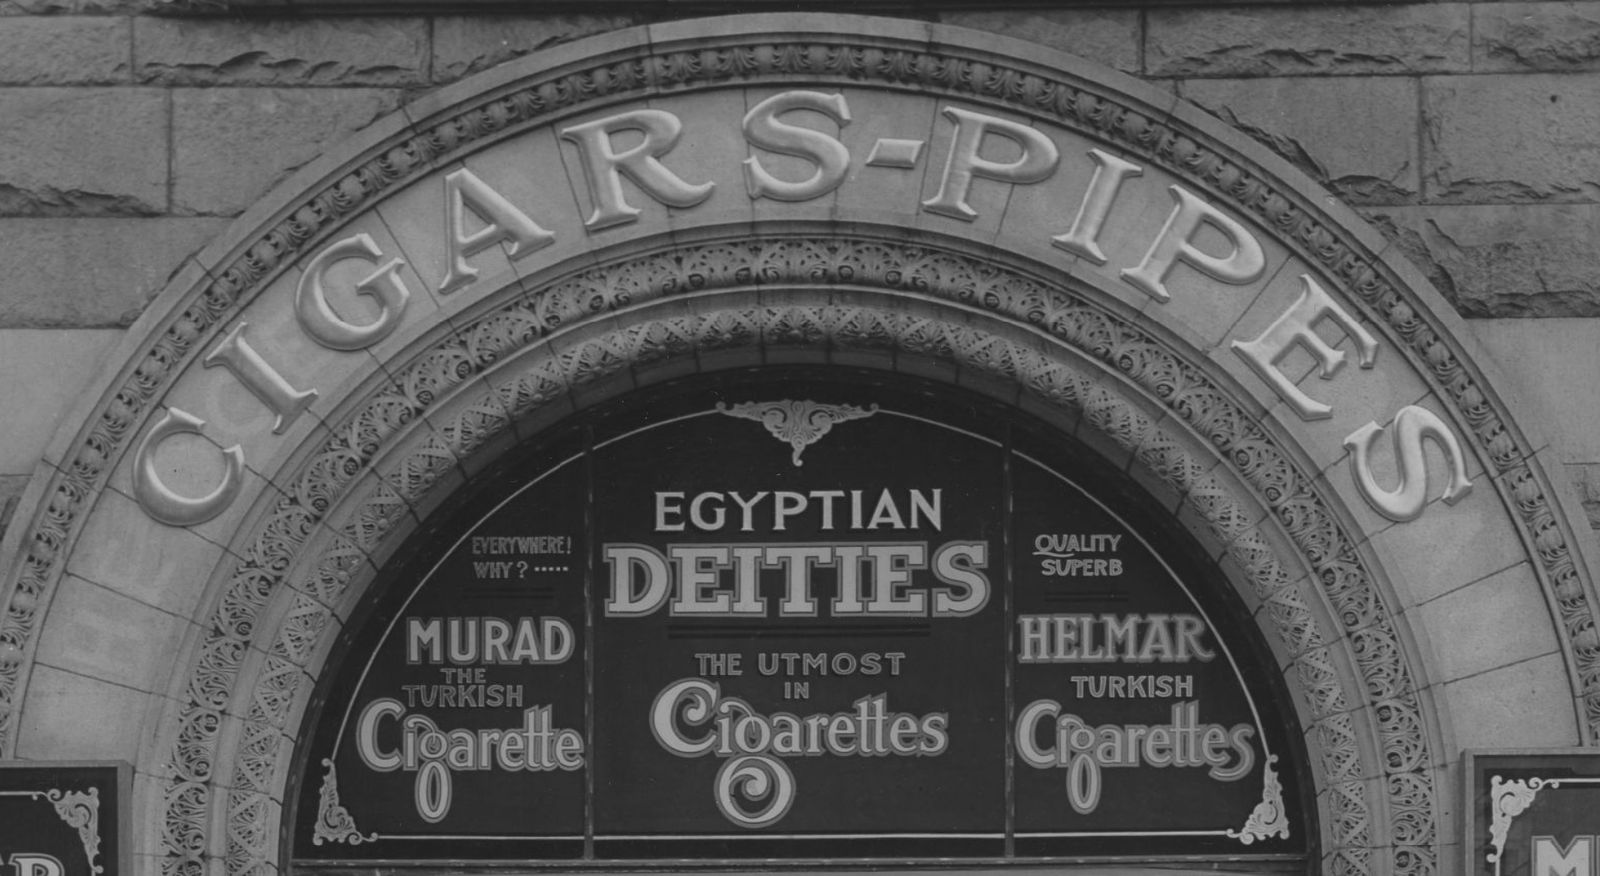 Letters saying "Cigars-Pipes" mounted on an architectural arch, and then signage advertising cigarettes set within the central semi-circle.